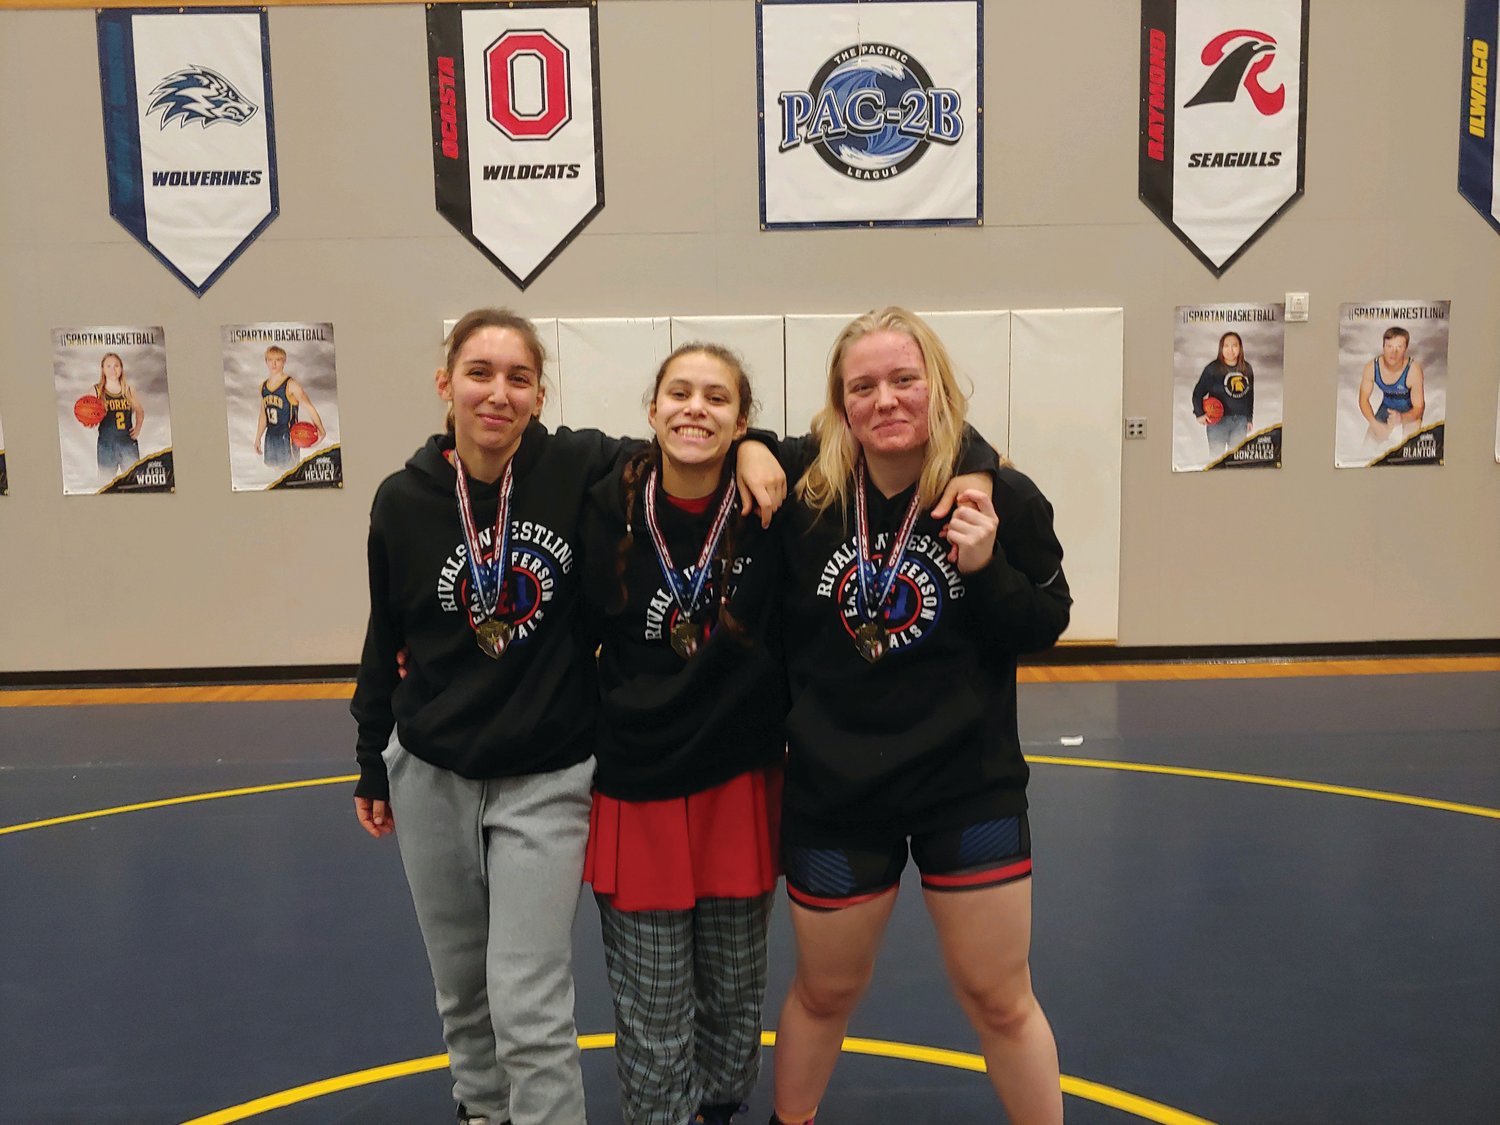 Chloe Lampert, Mi Amada Lanphear Ramirez, and Melody Douglas show their hard-earned medals achieved through a day of tough matches on the mat at the Forks wrestling tournament.